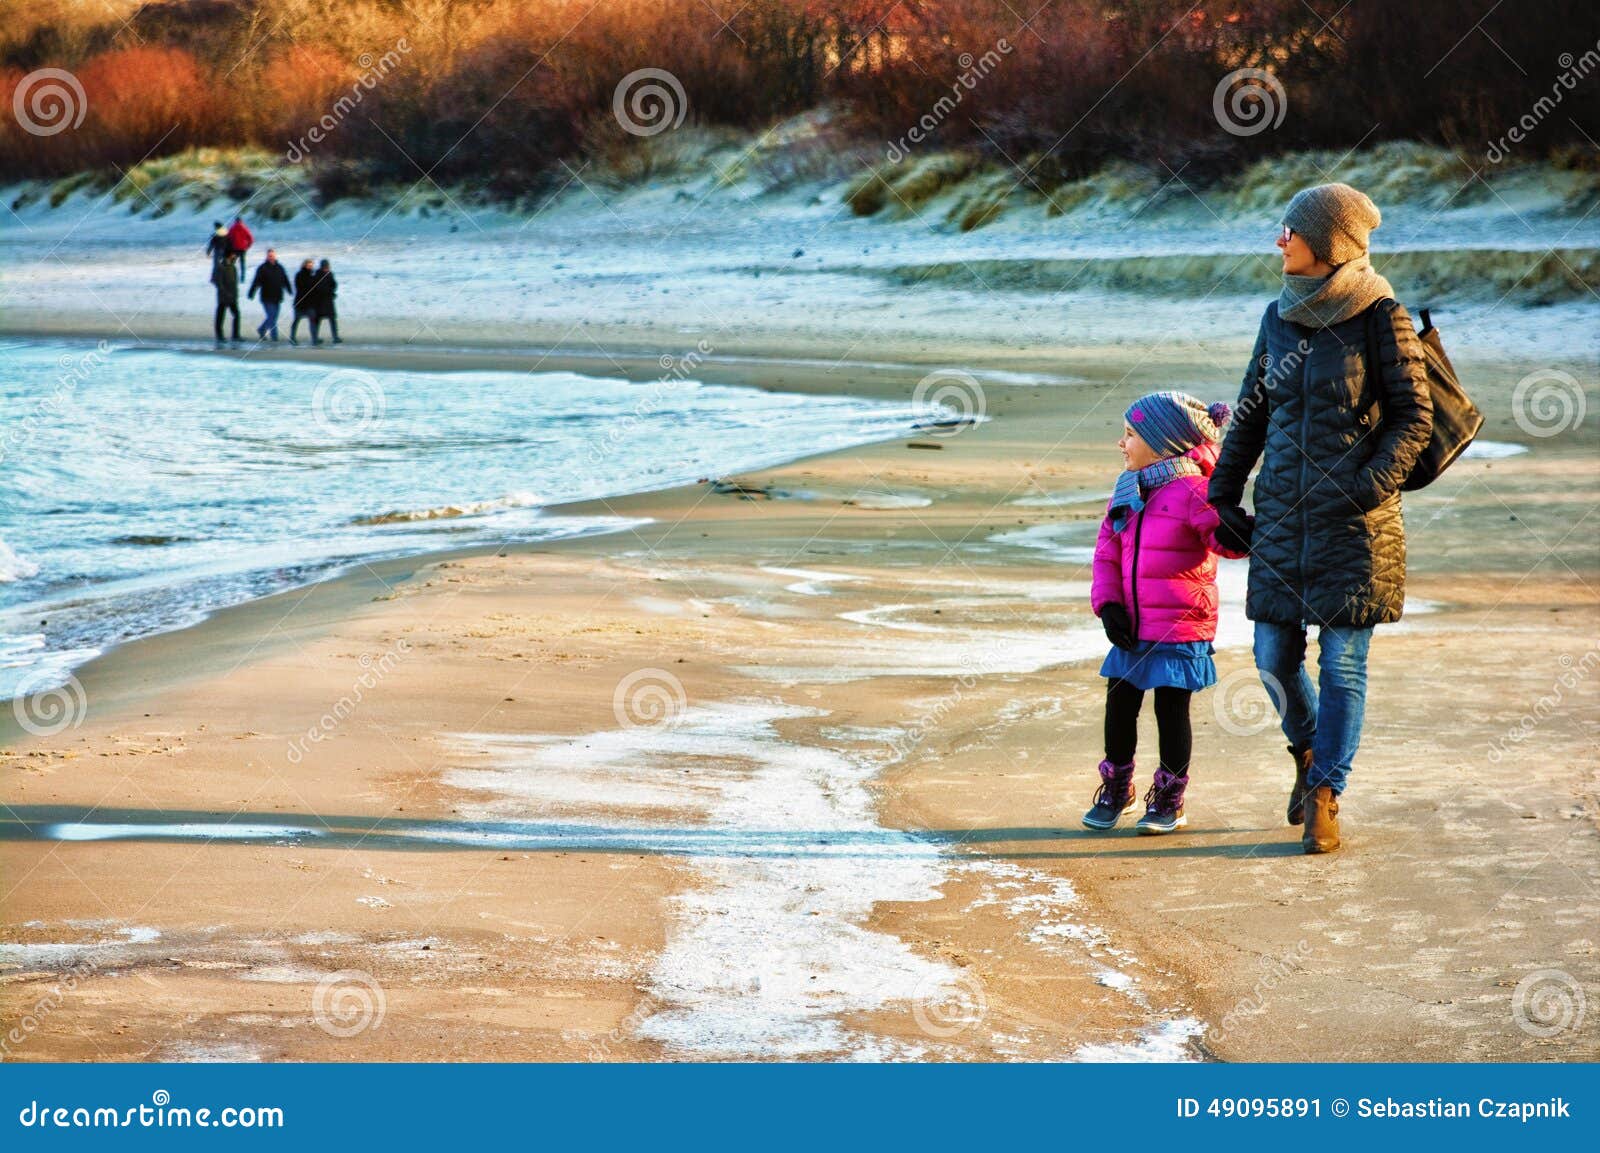 winter walk by baltic sea, mother and daughter